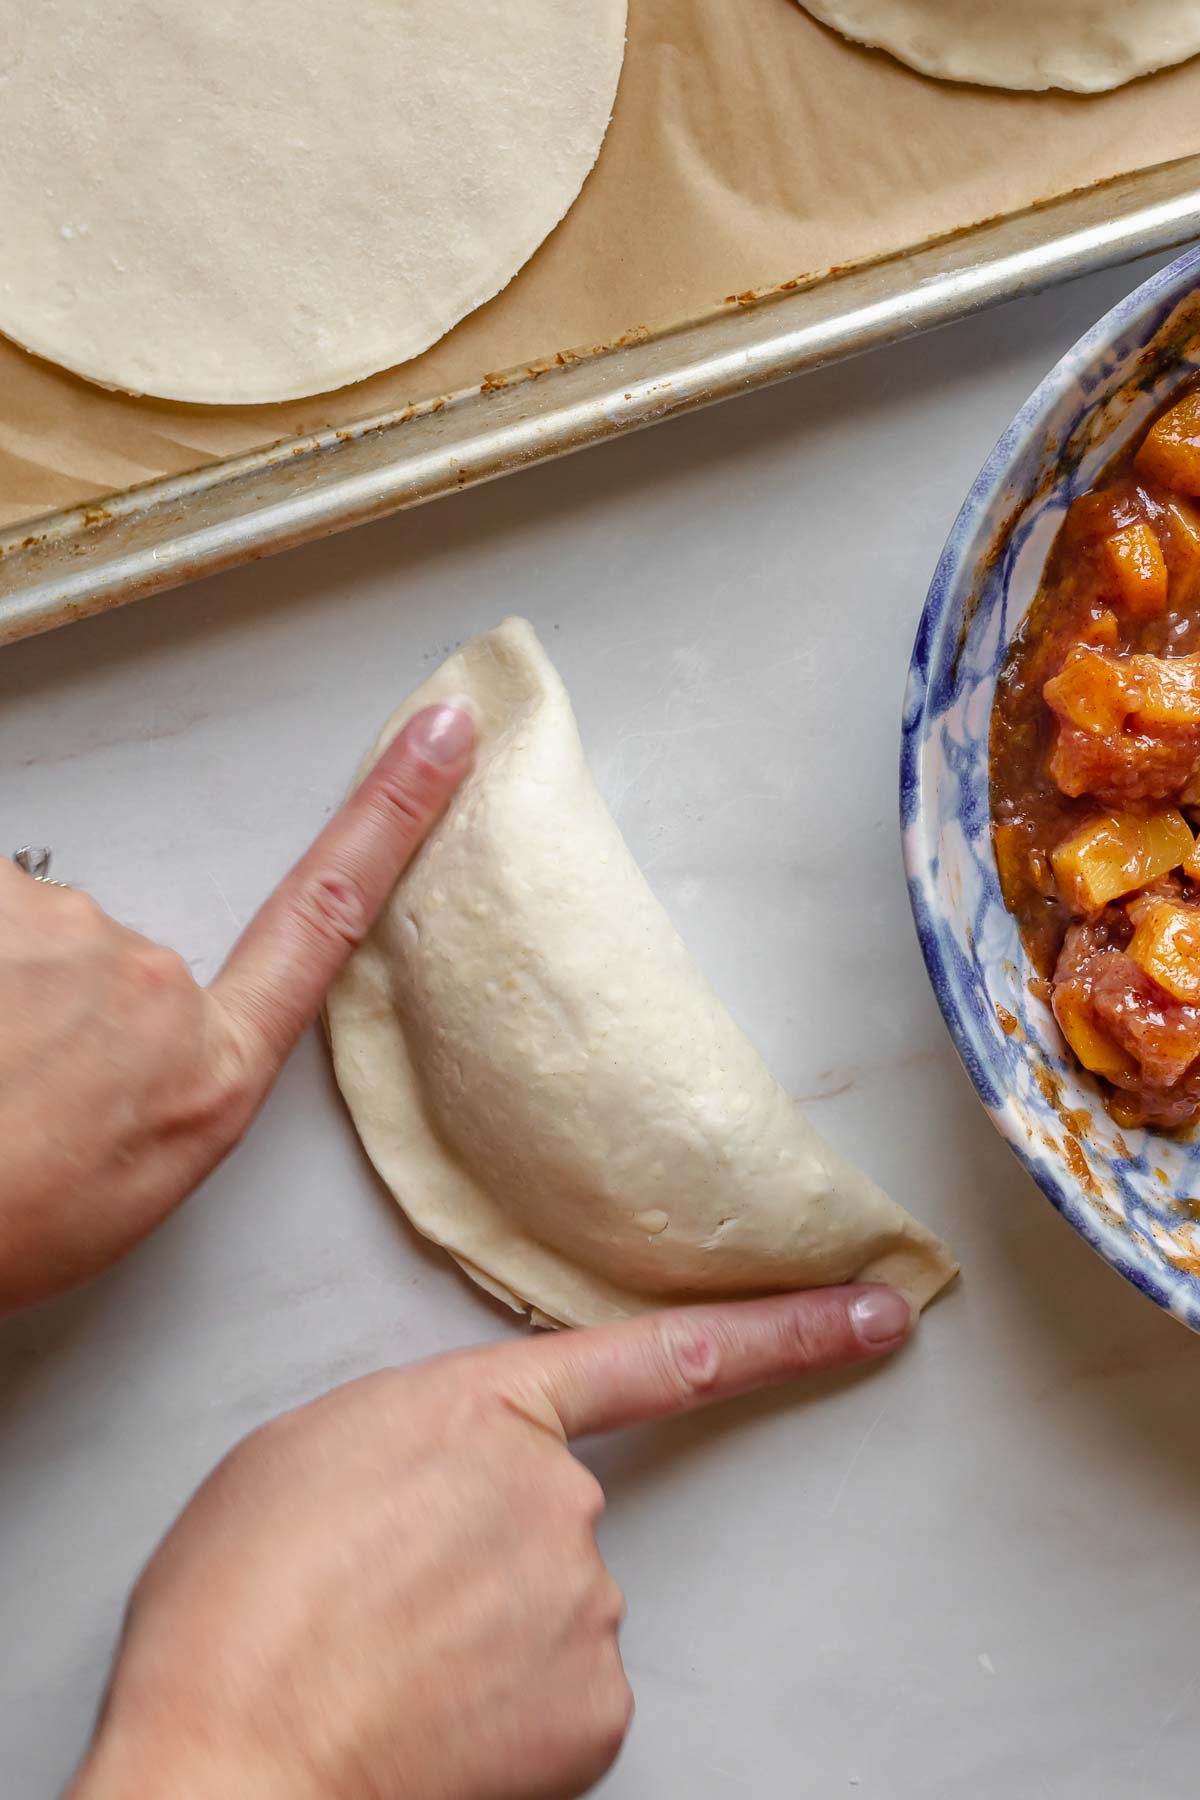 Fingers press down to seal the edges of the peach hand pie.